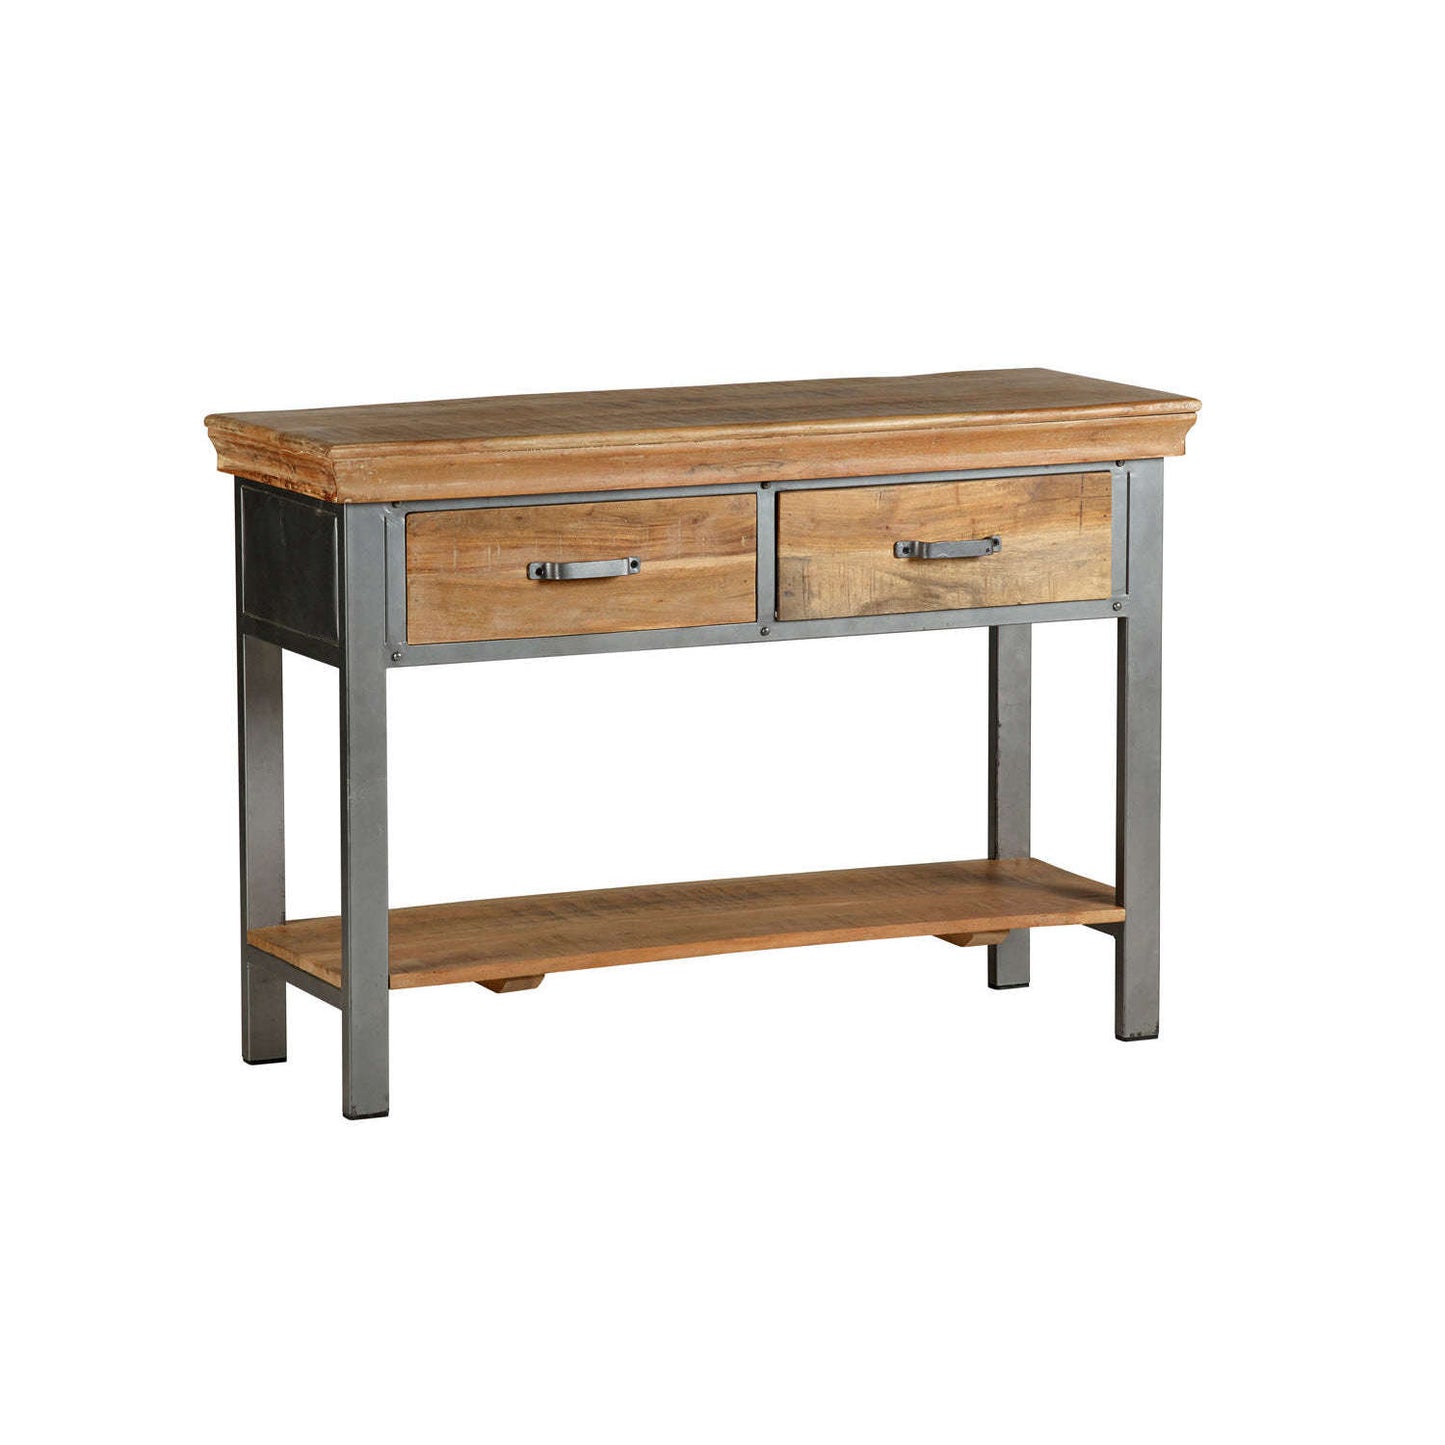 Ashpinoke:2 Drawer Console Table,Console and Hall Tables,Indian Hub